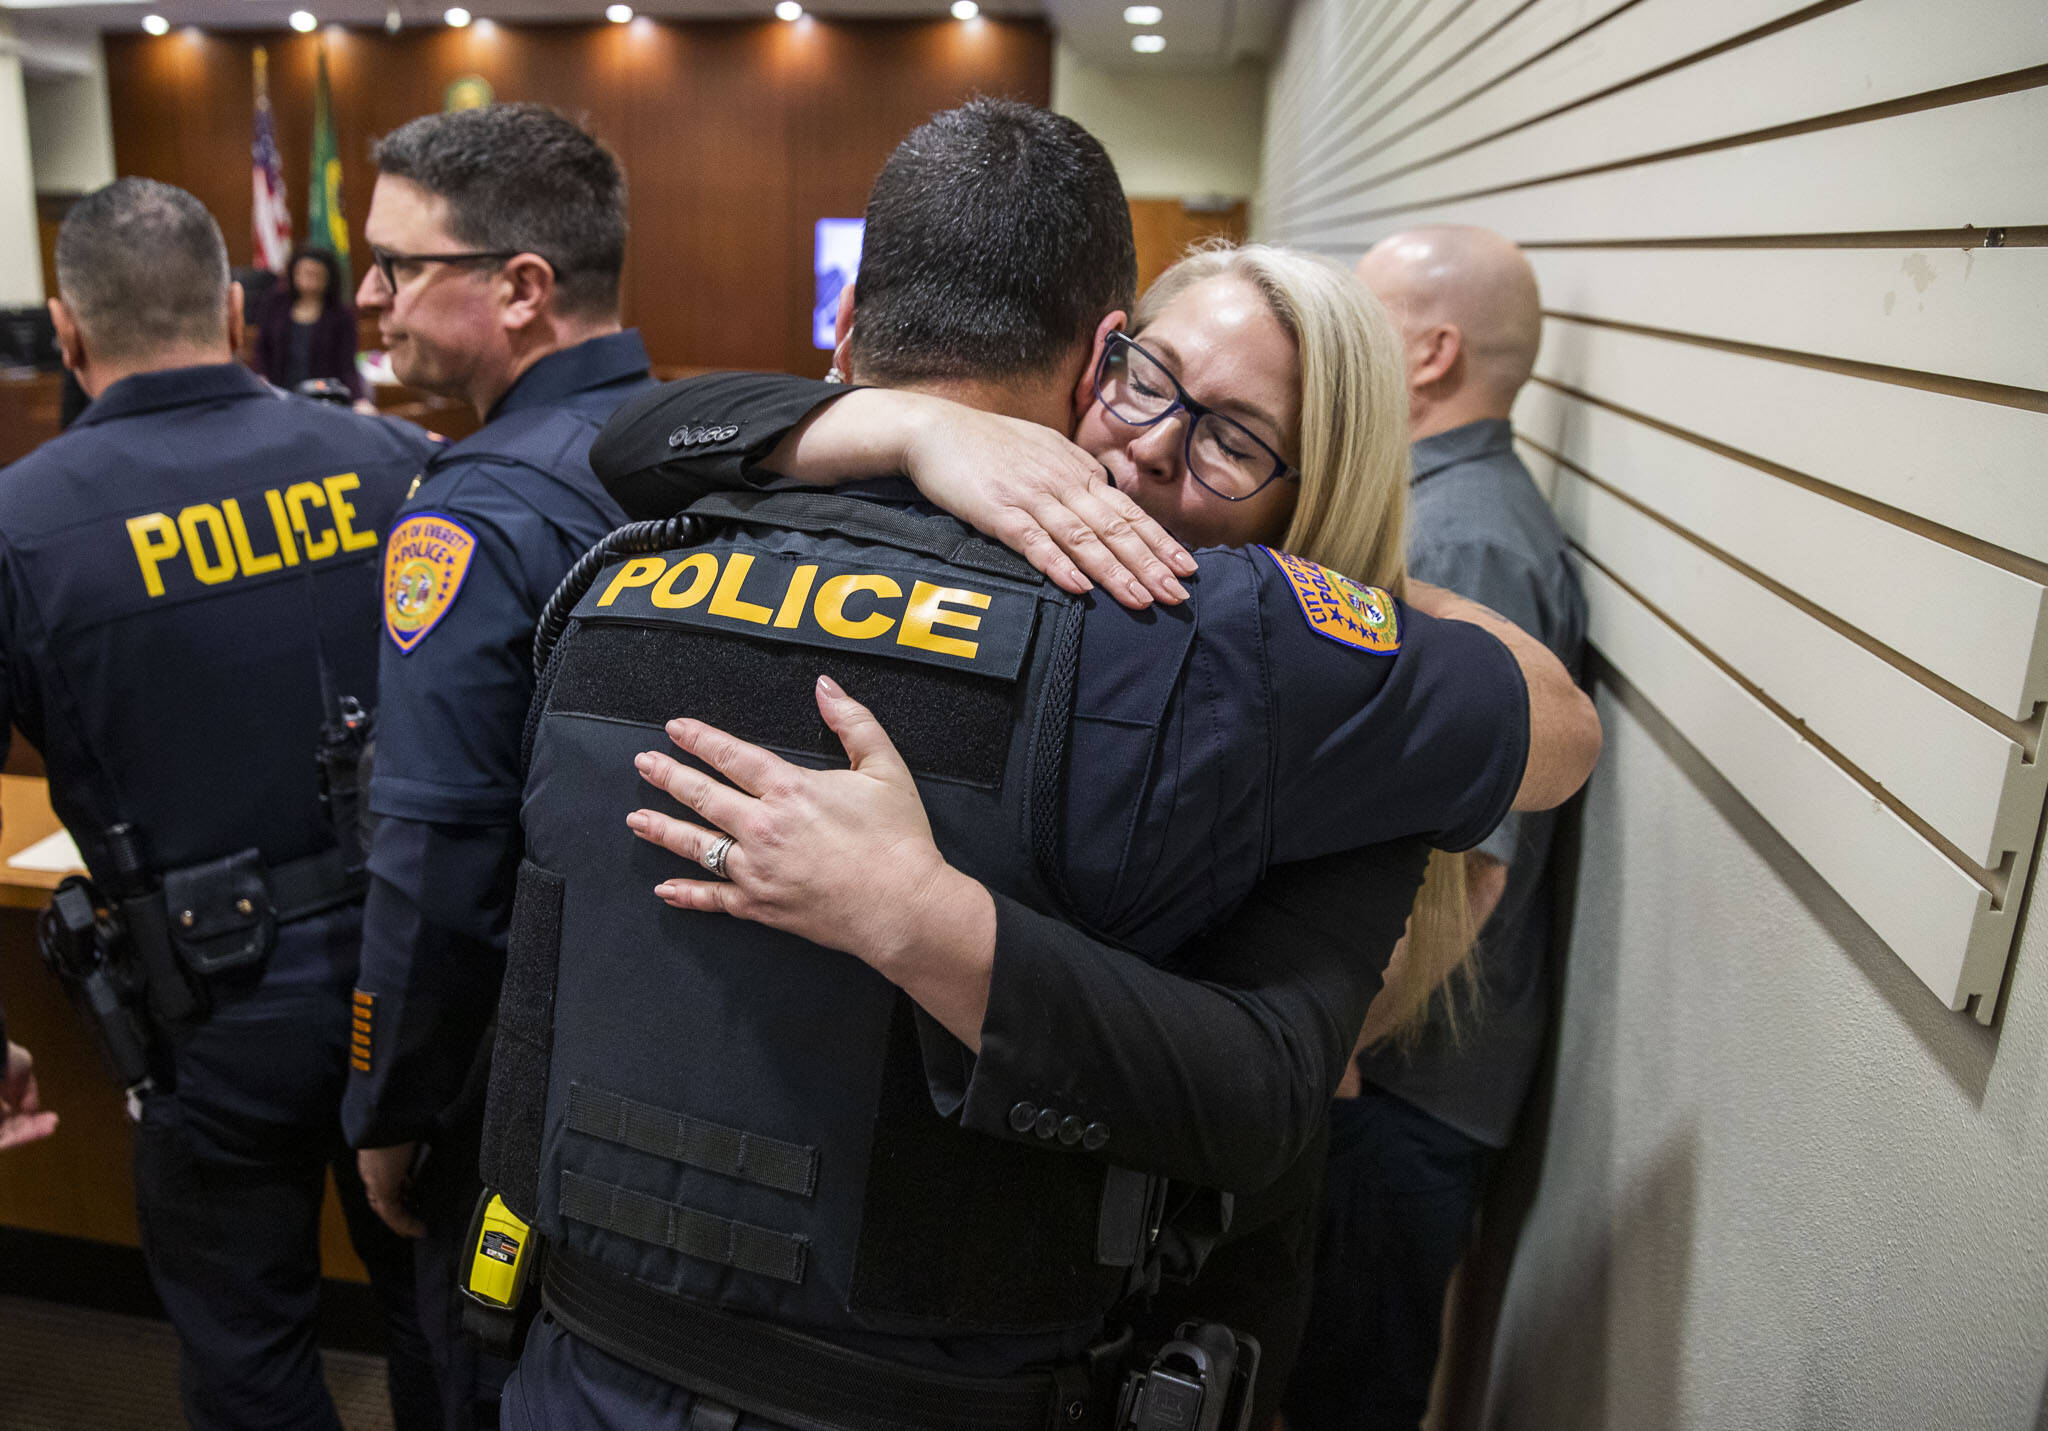 Snohomish County Detective Kendra Conley, right, hugs Everett police Lt. Tim Collings after the reading of the verdict of the trial of Richard Rotter at the Snohomish County Courthouse on Monday, April 3, 2023, in Everett, Washington. (Olivia Vanni / The Herald)